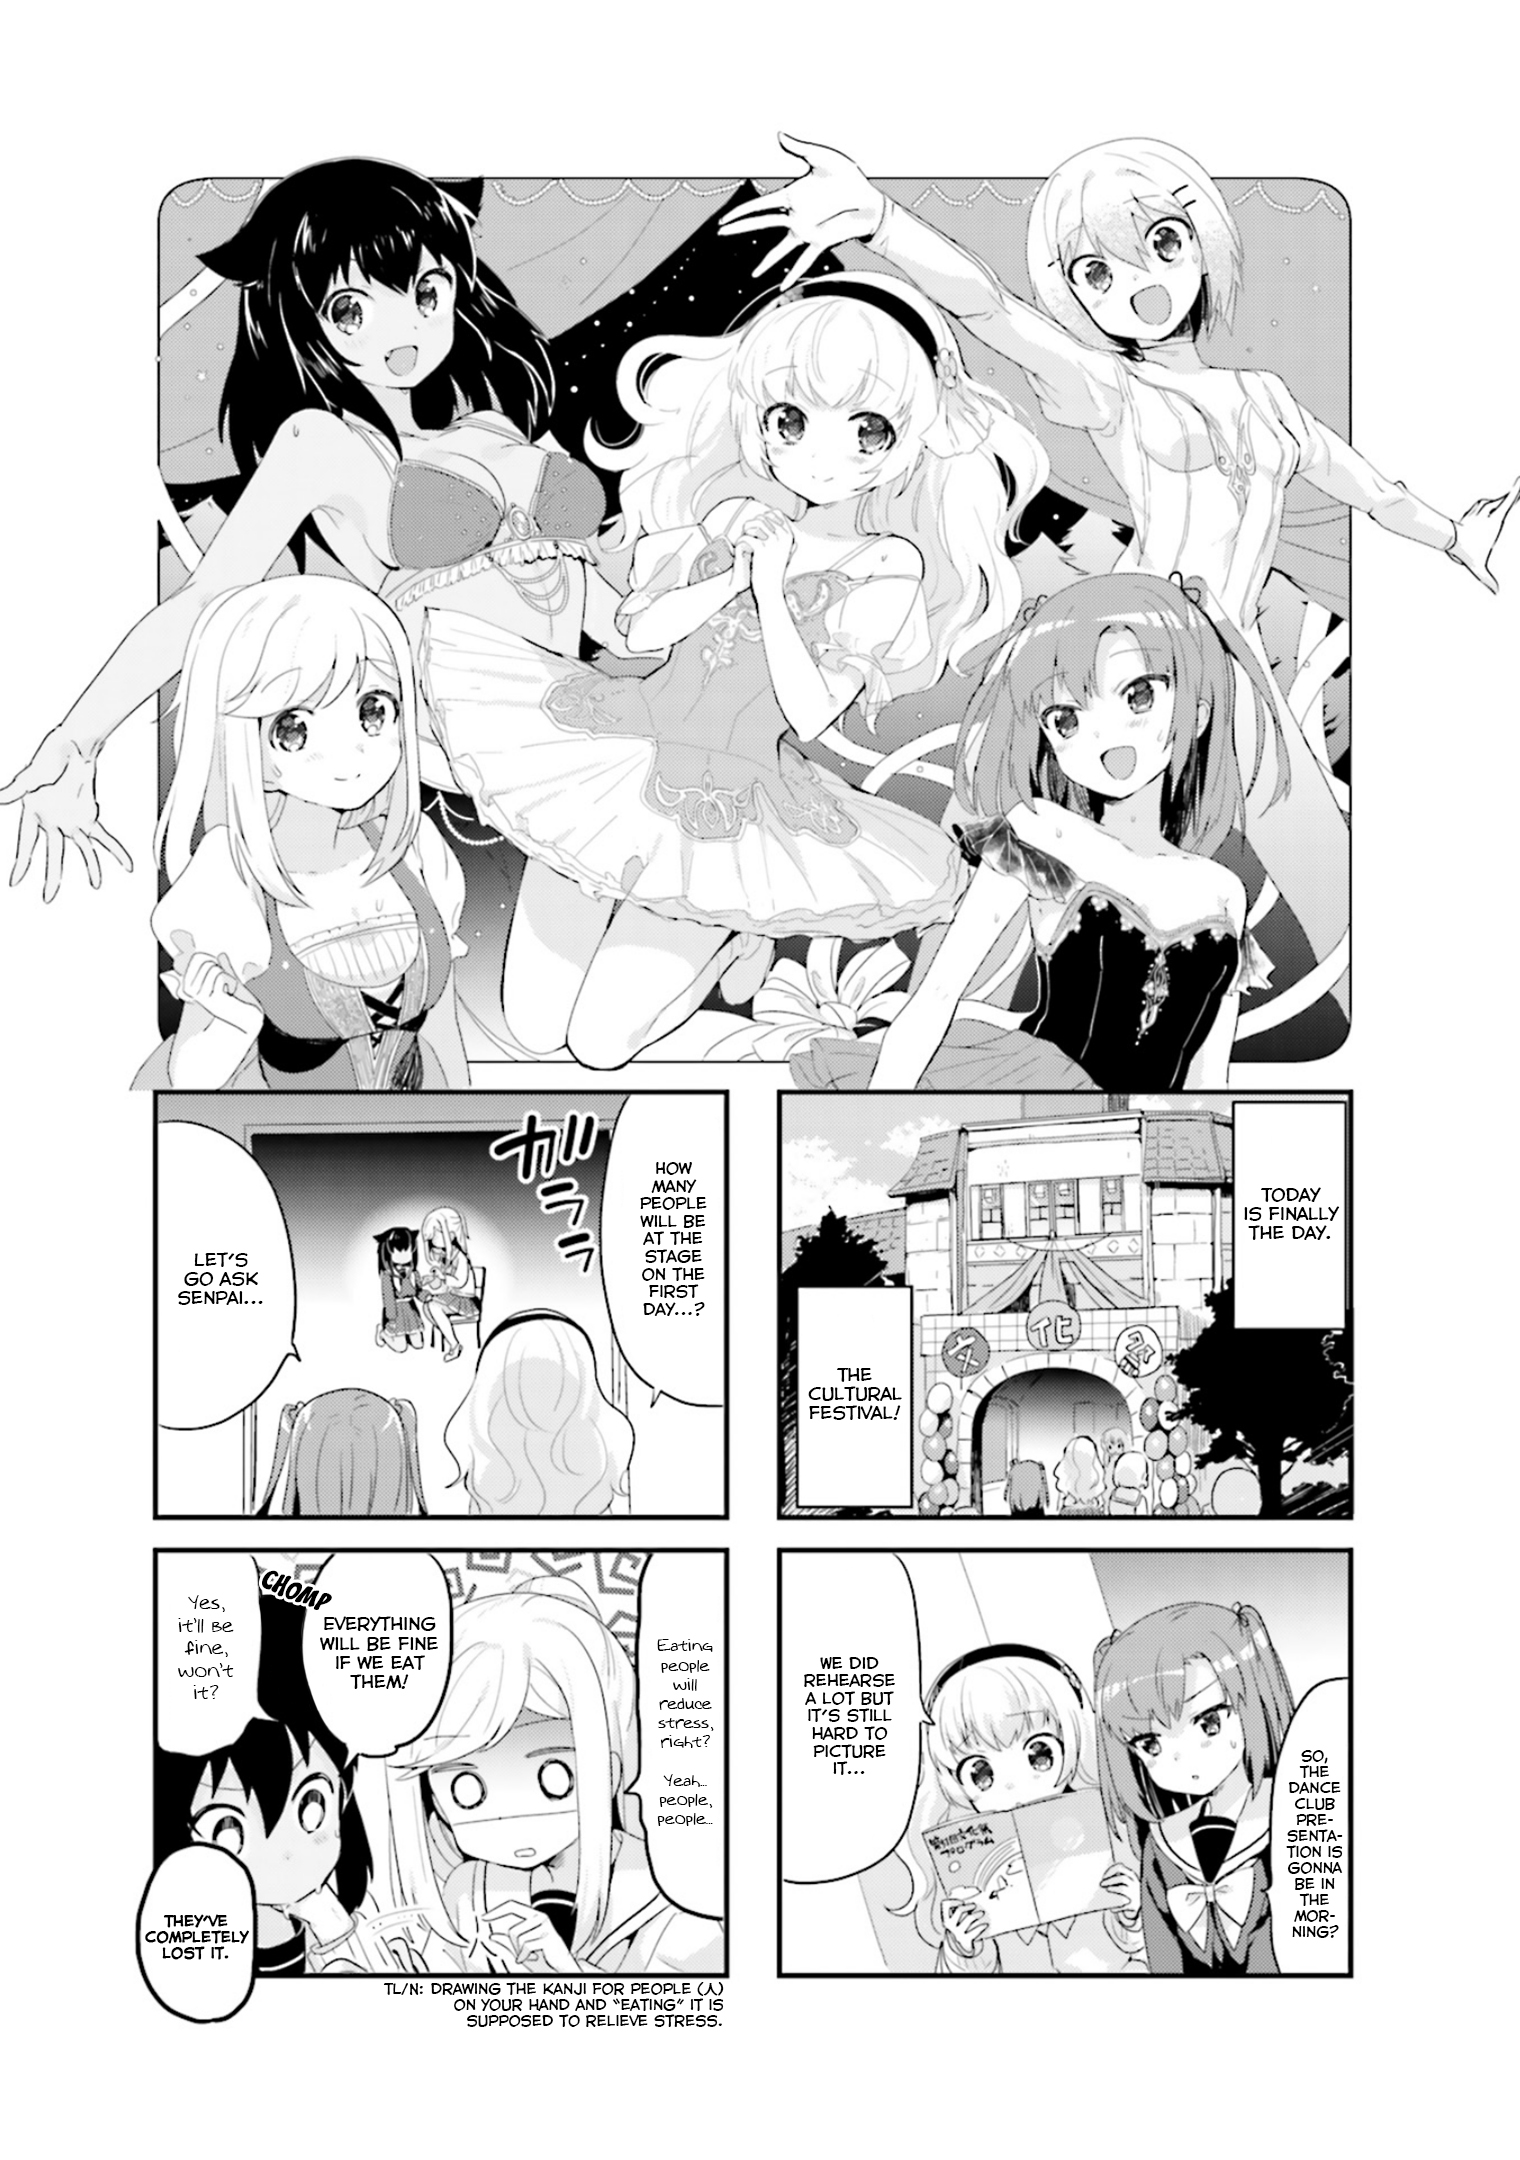 Dreaming Prima Girl! Vol.1 Chapter 13